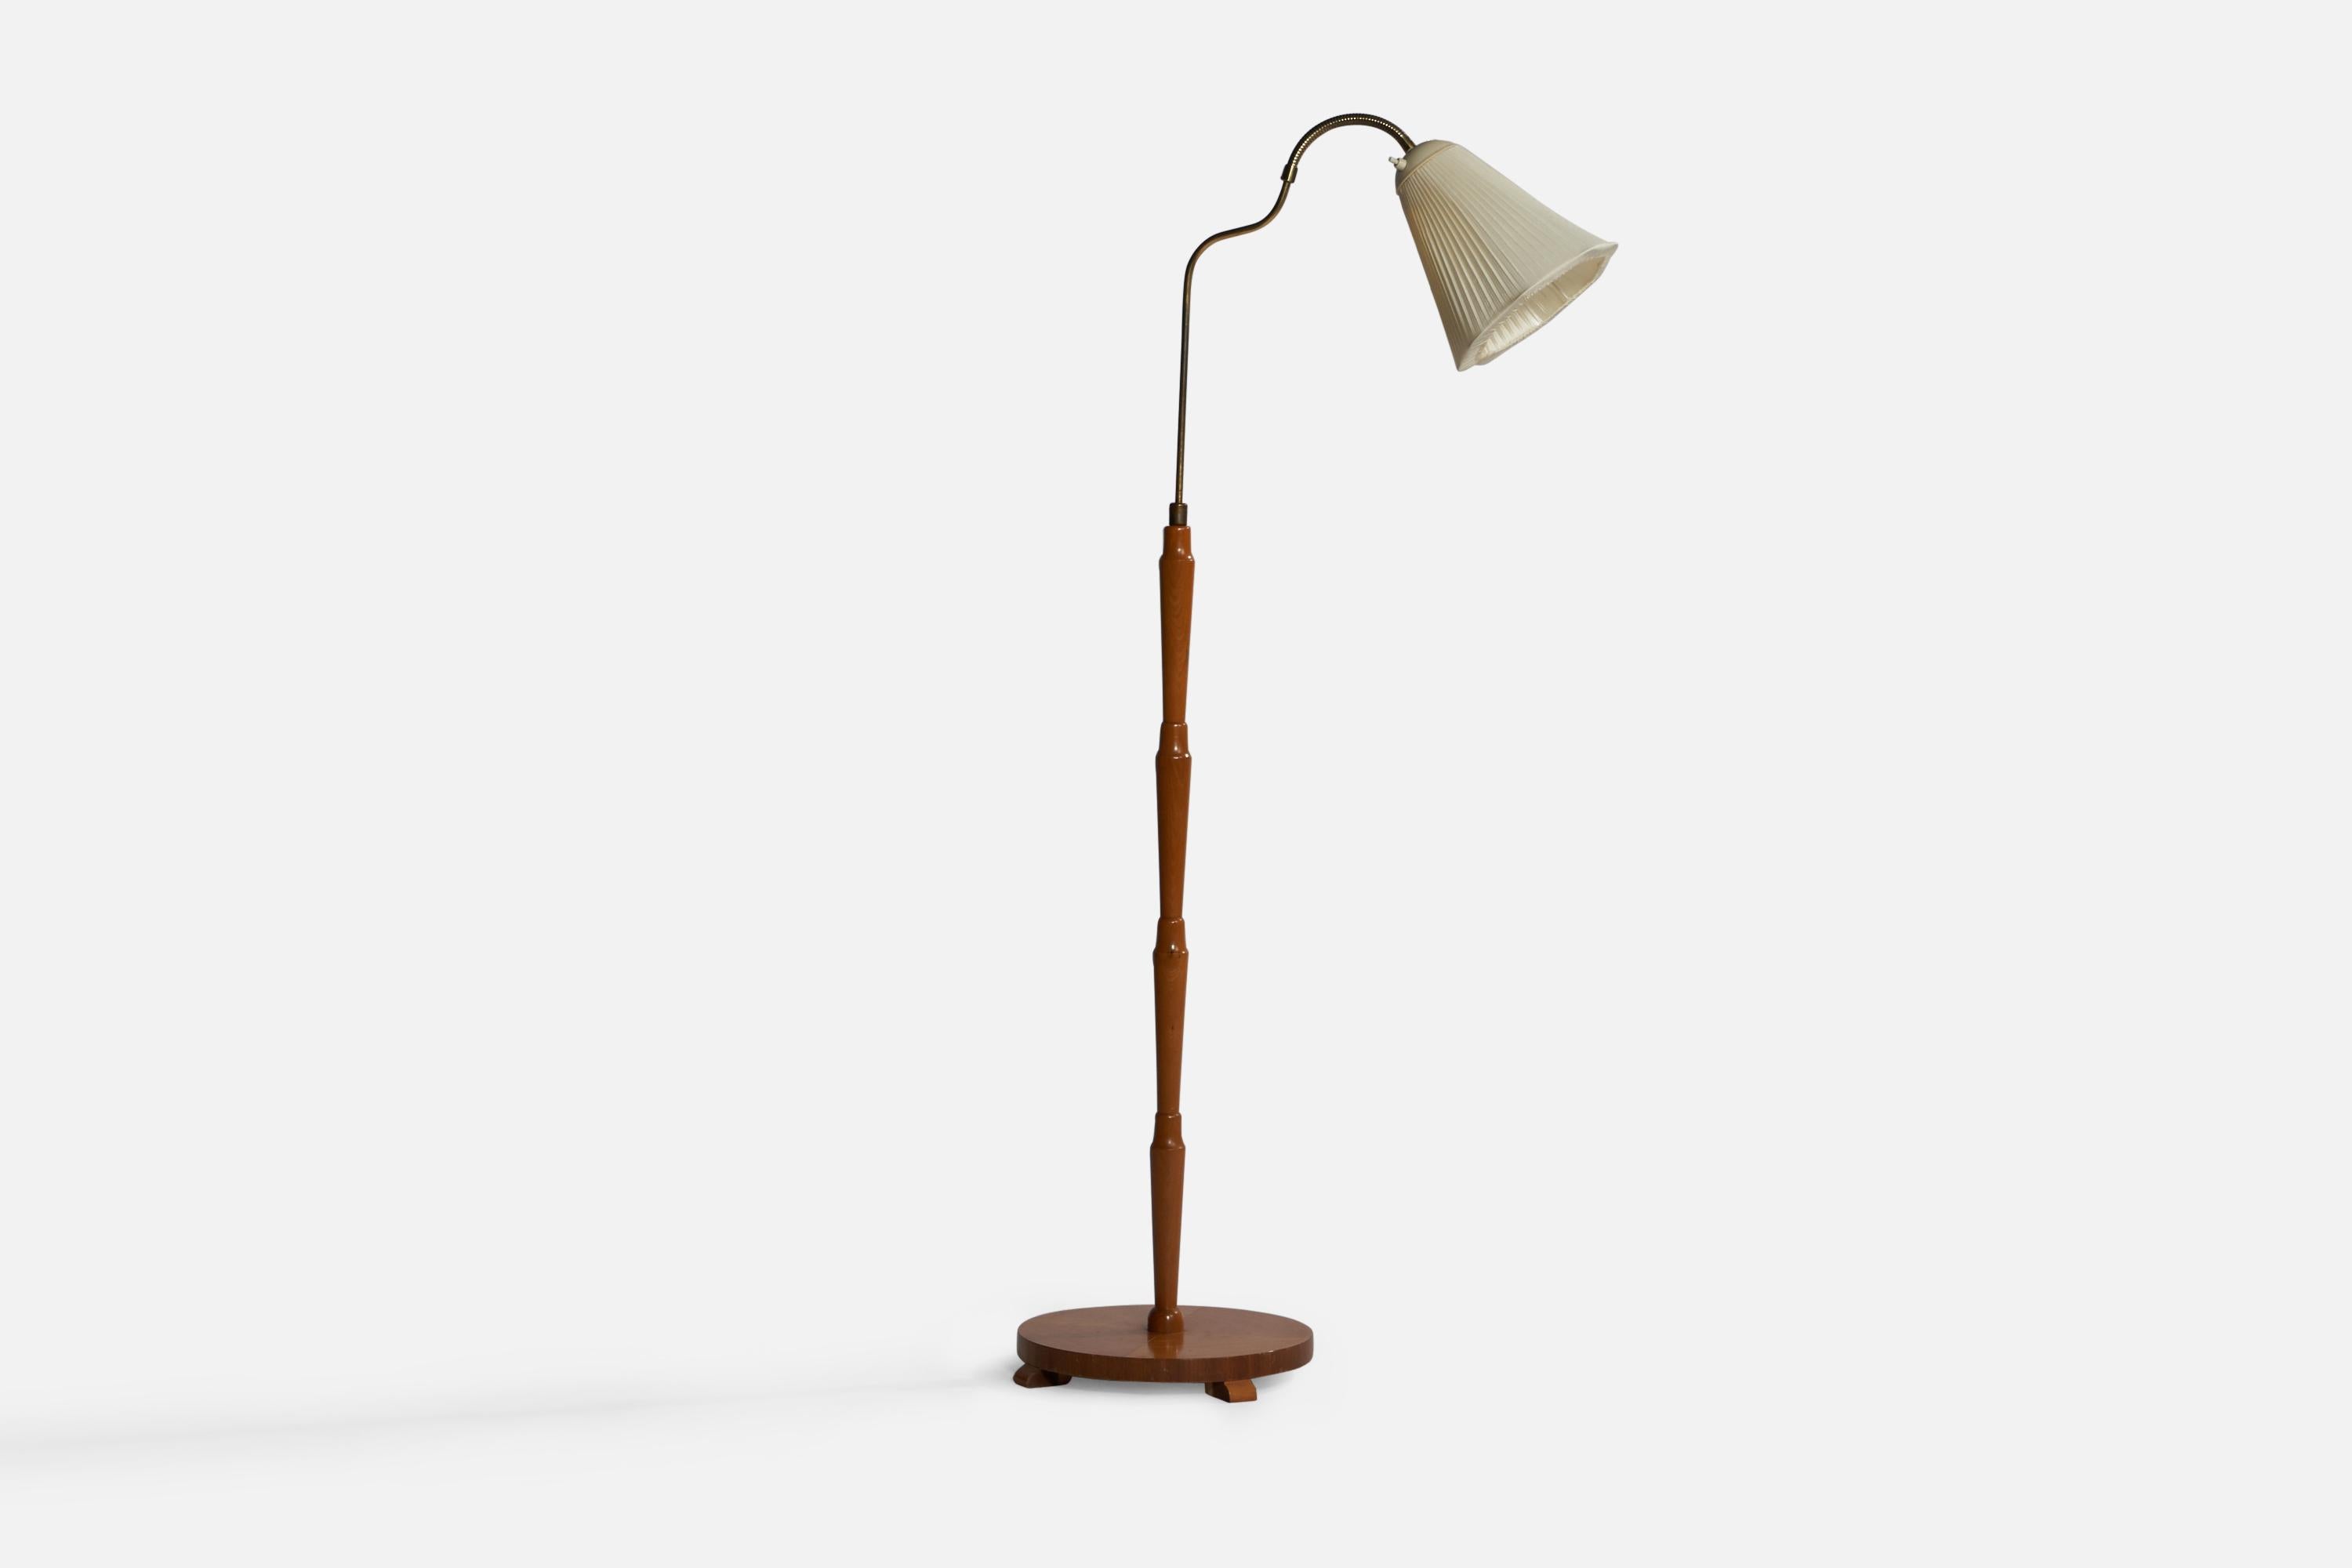 An adjustable organic brass, stained elm and off-white fabric floor lamp designed and produced in Sweden, 1930s.

Overall Dimensions (inches): 59” H x 13.75” W x 27.25” D. Stated dimensions include shade.
Dimensions vary based on position of